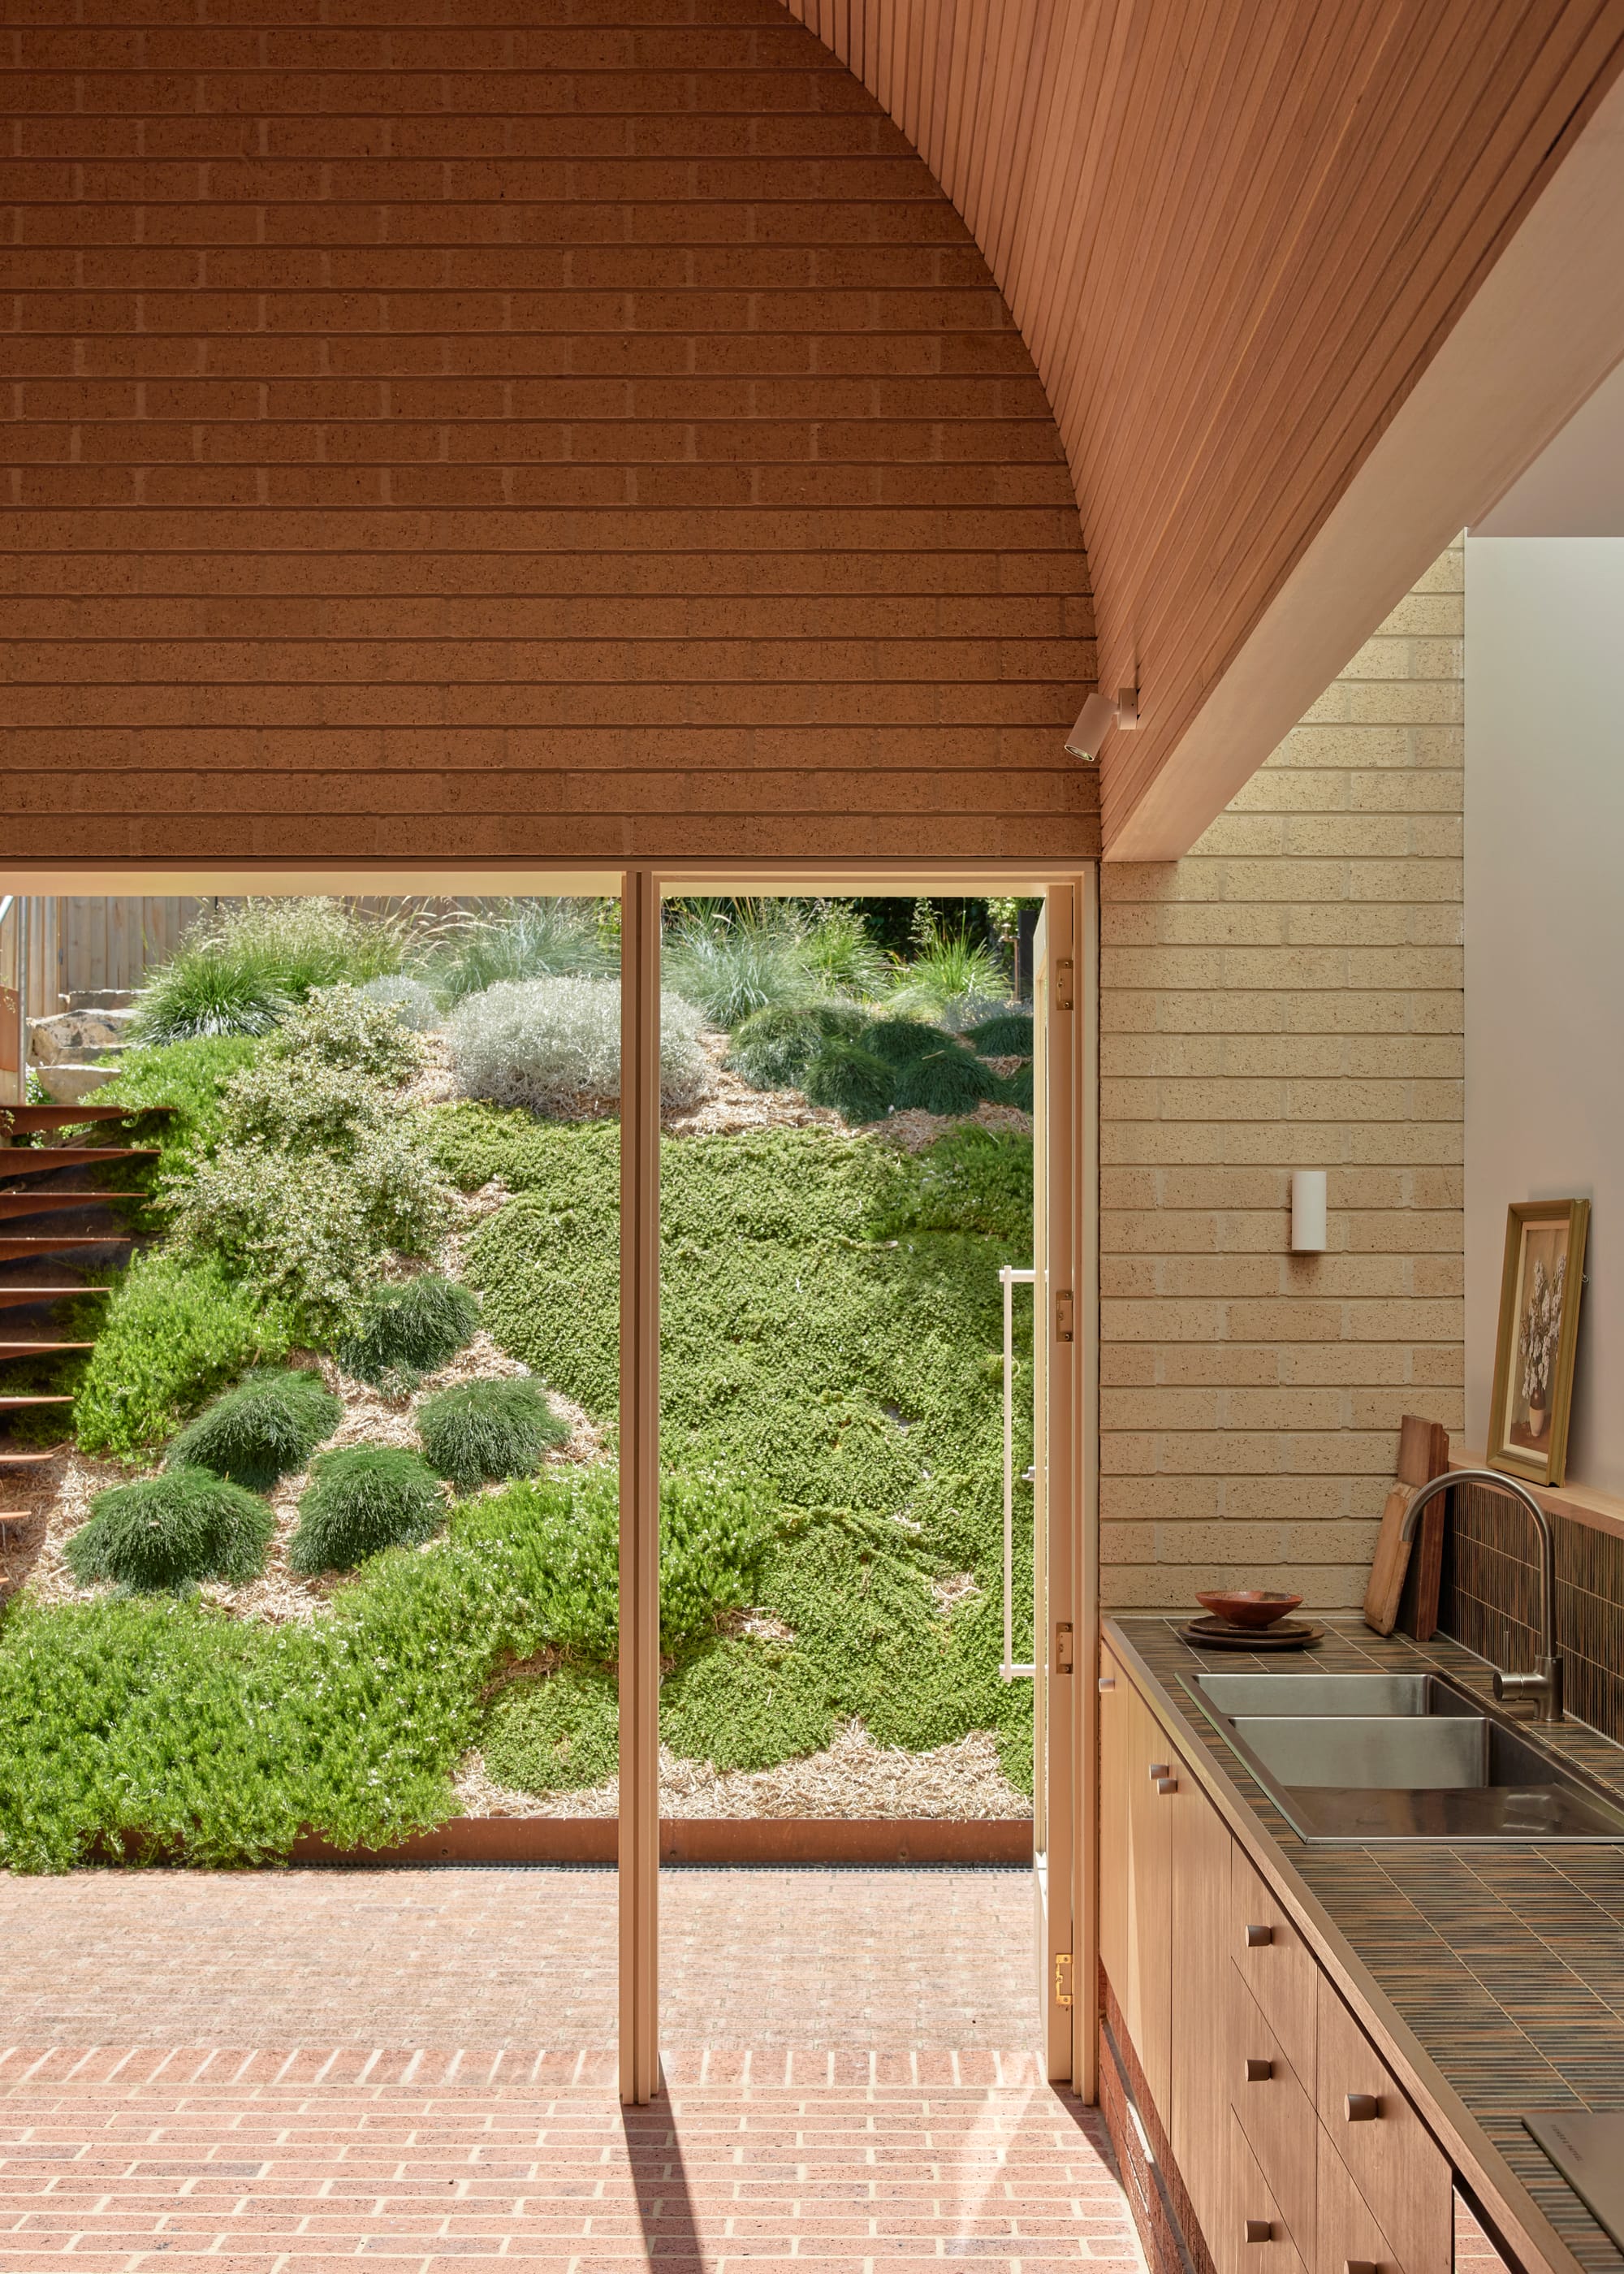 Harriet's House by SO:Architecture. Photography by Sean Fennessy. Tall arched ceiling clad with Tasmanian Oak. Brick floors inside and out. Sloping garden covered with low-lying plants.